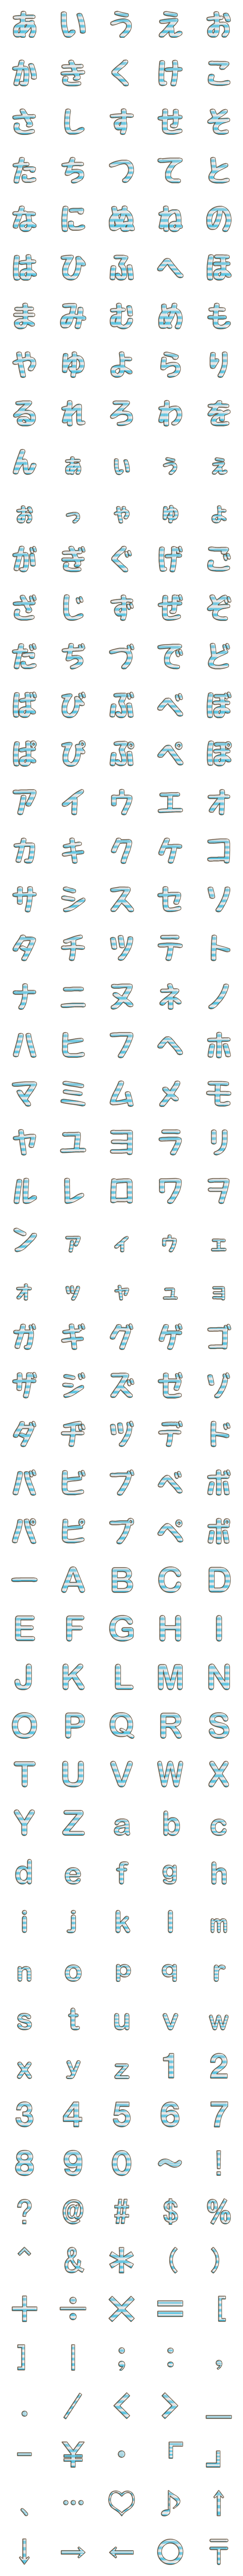 [LINE絵文字]≣ボーダー柄絵文字≣【水色×白】の画像一覧